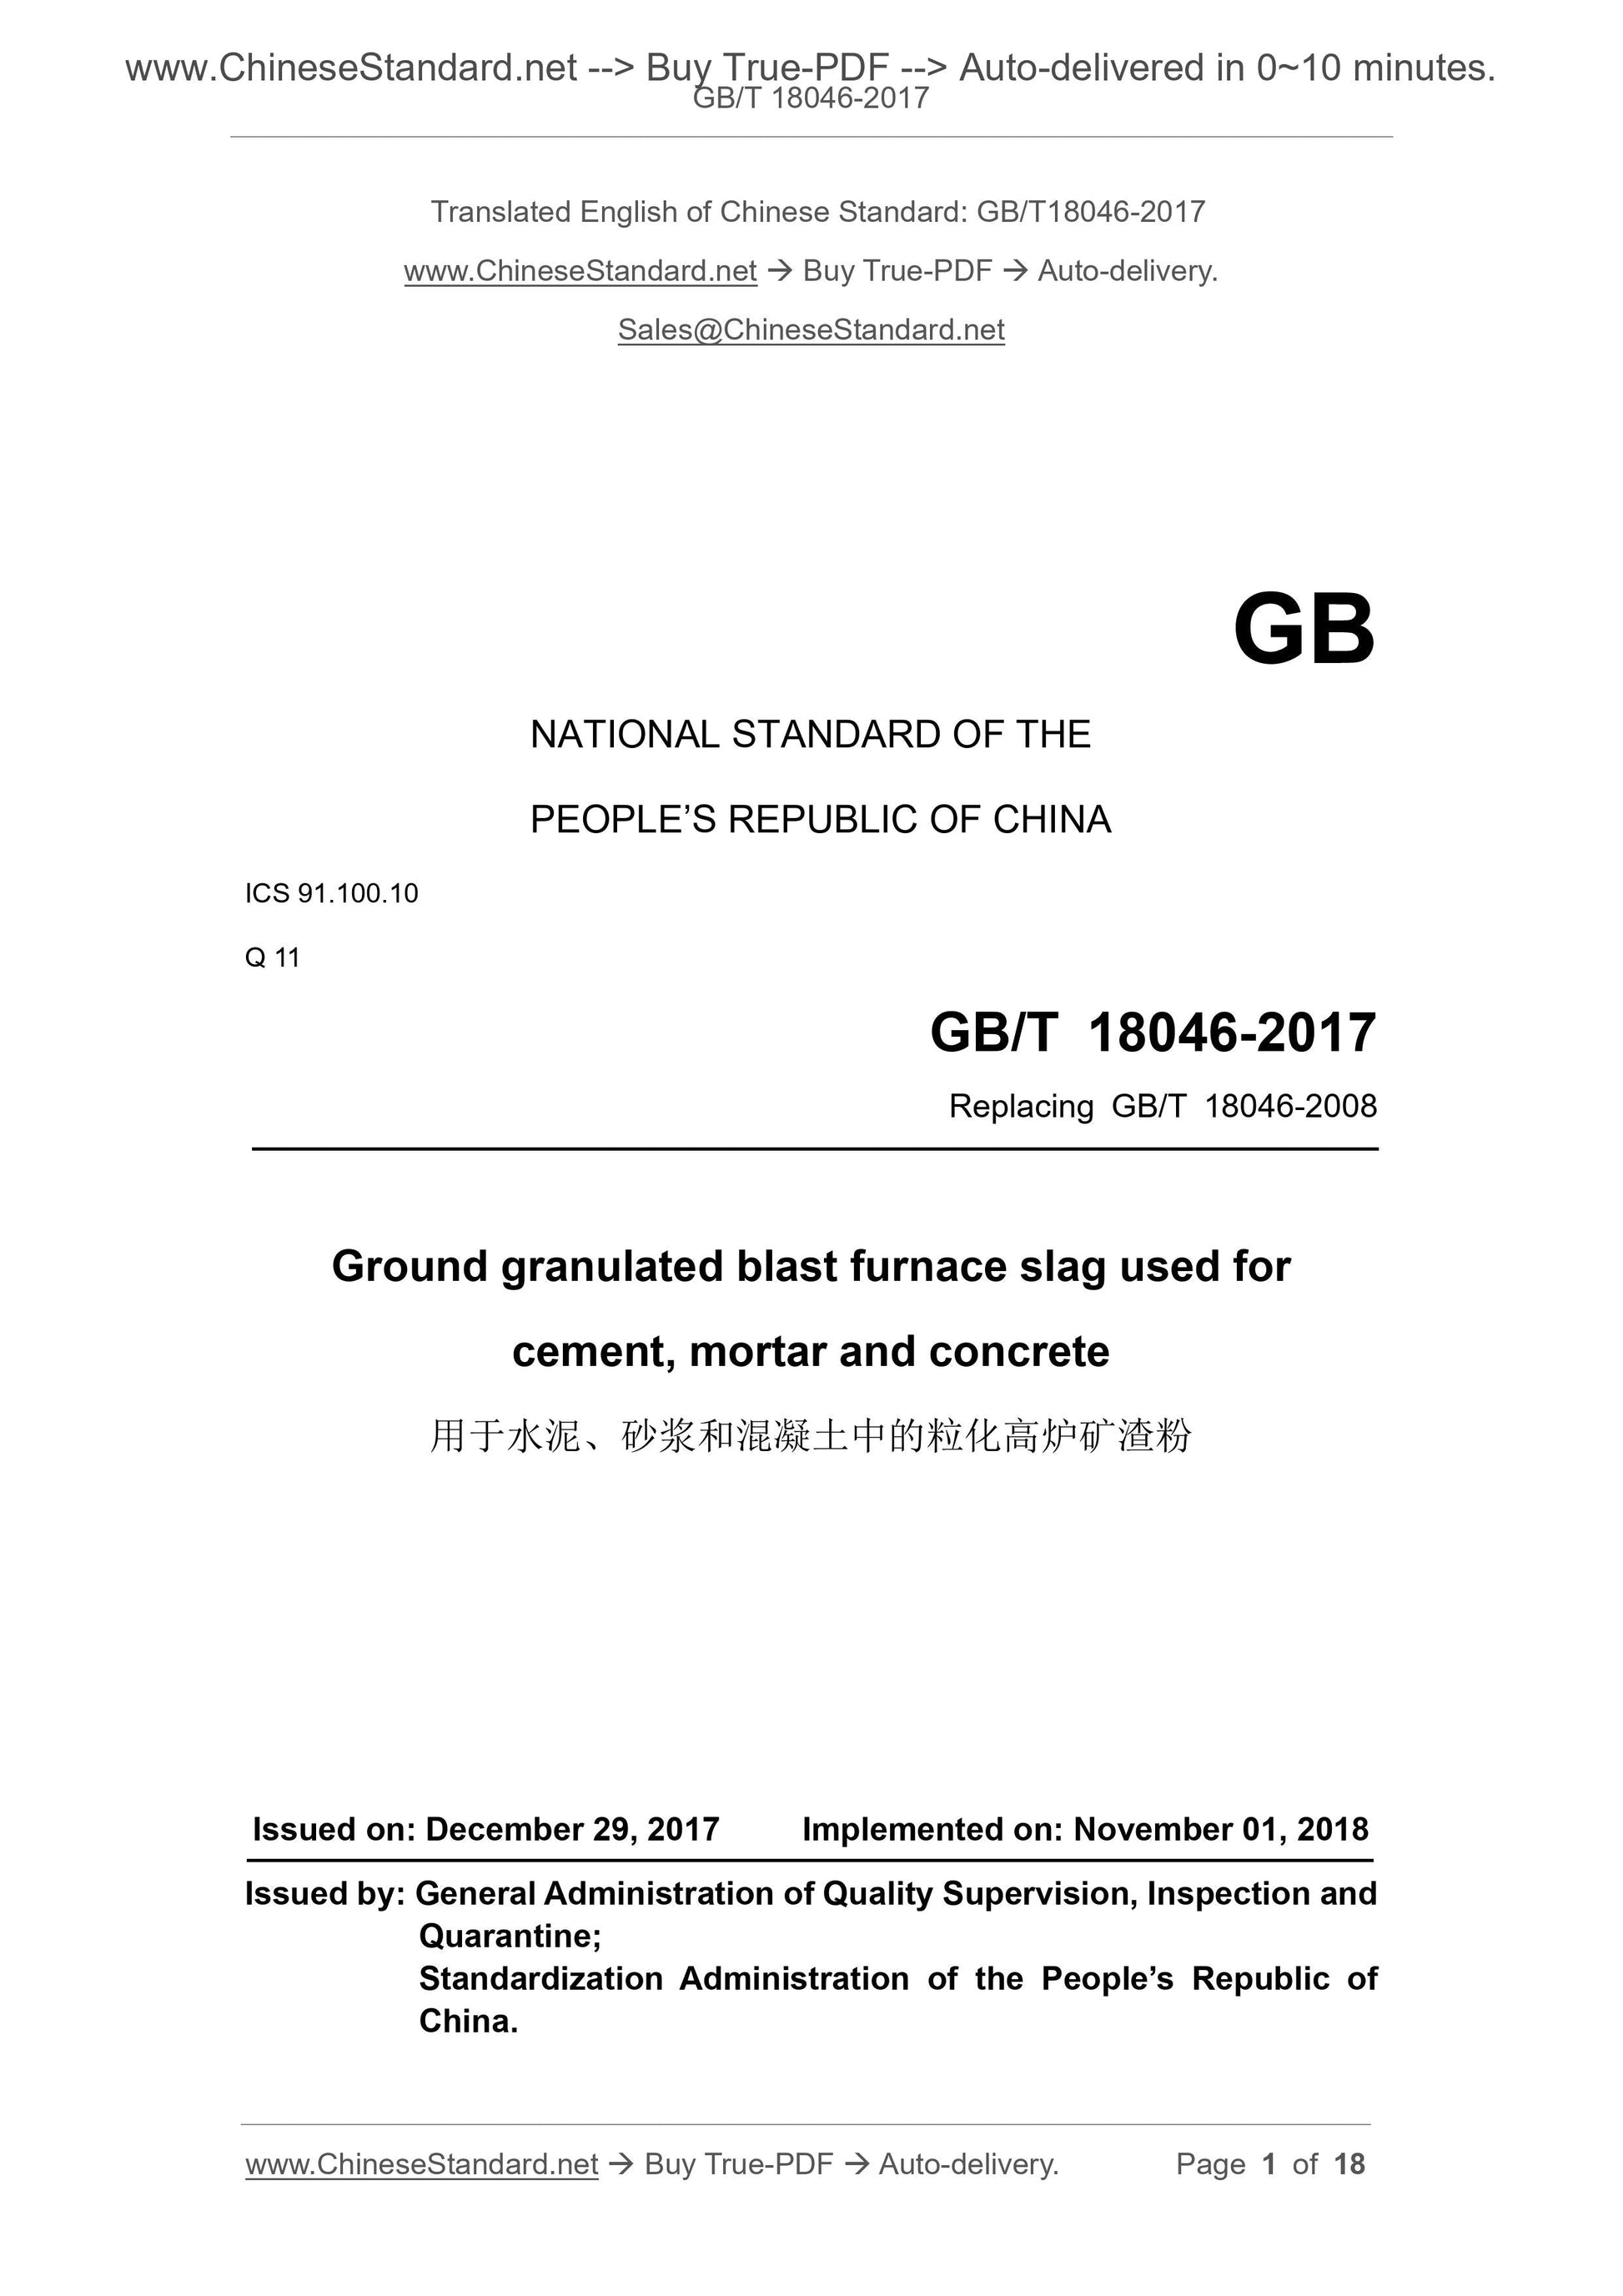 GB/T 18046-2017 Page 1